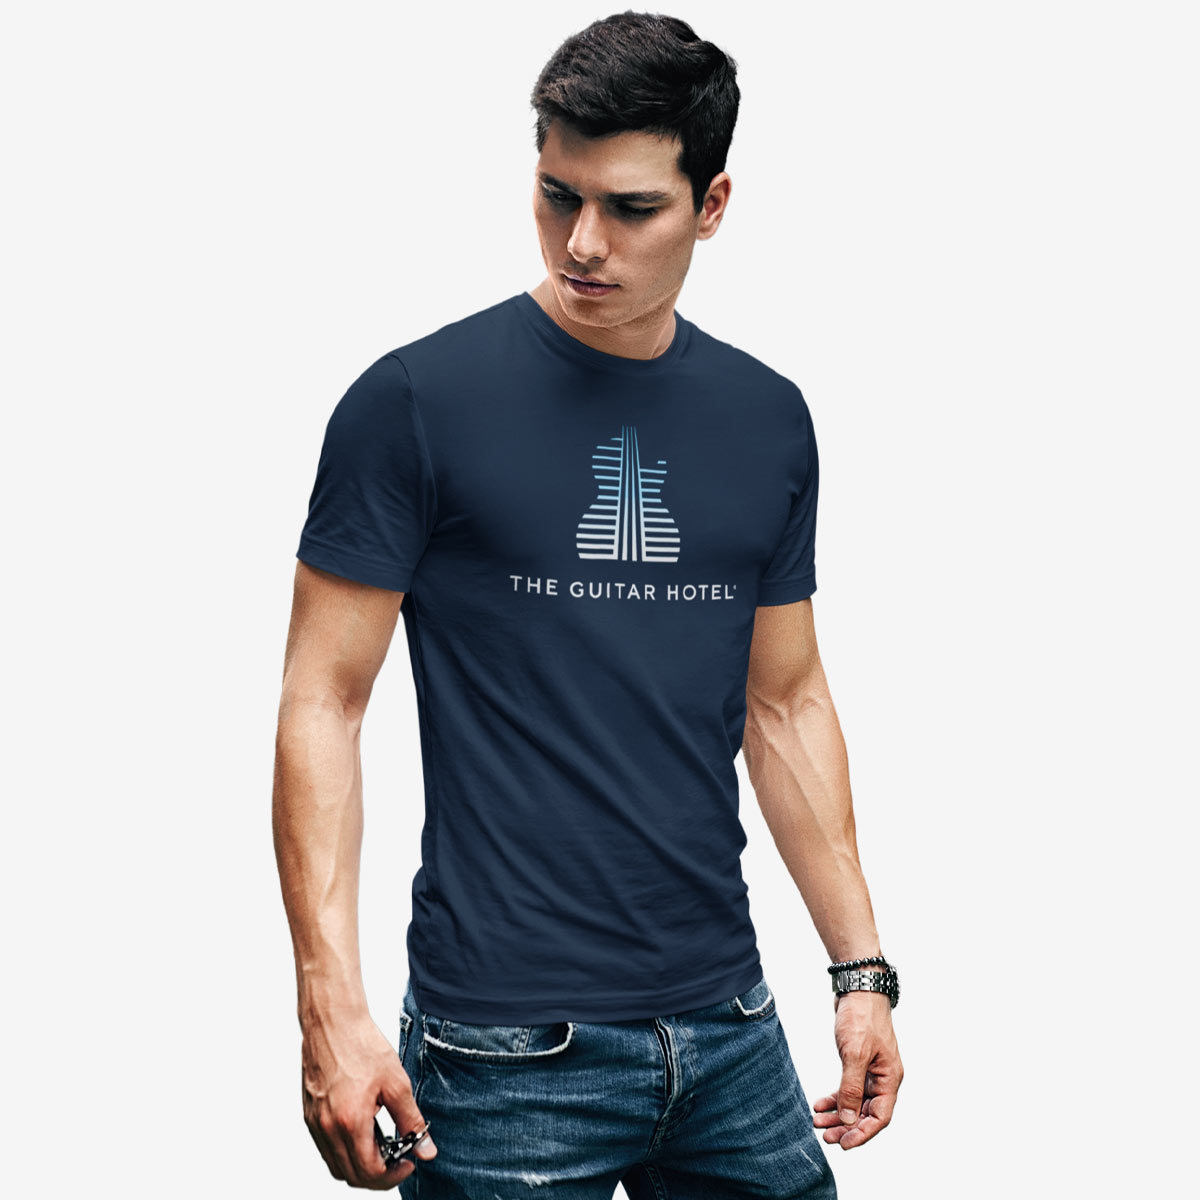 Guitar Hotel Adult Fit Tee in Navy with Gradient Guitar Design image number 3